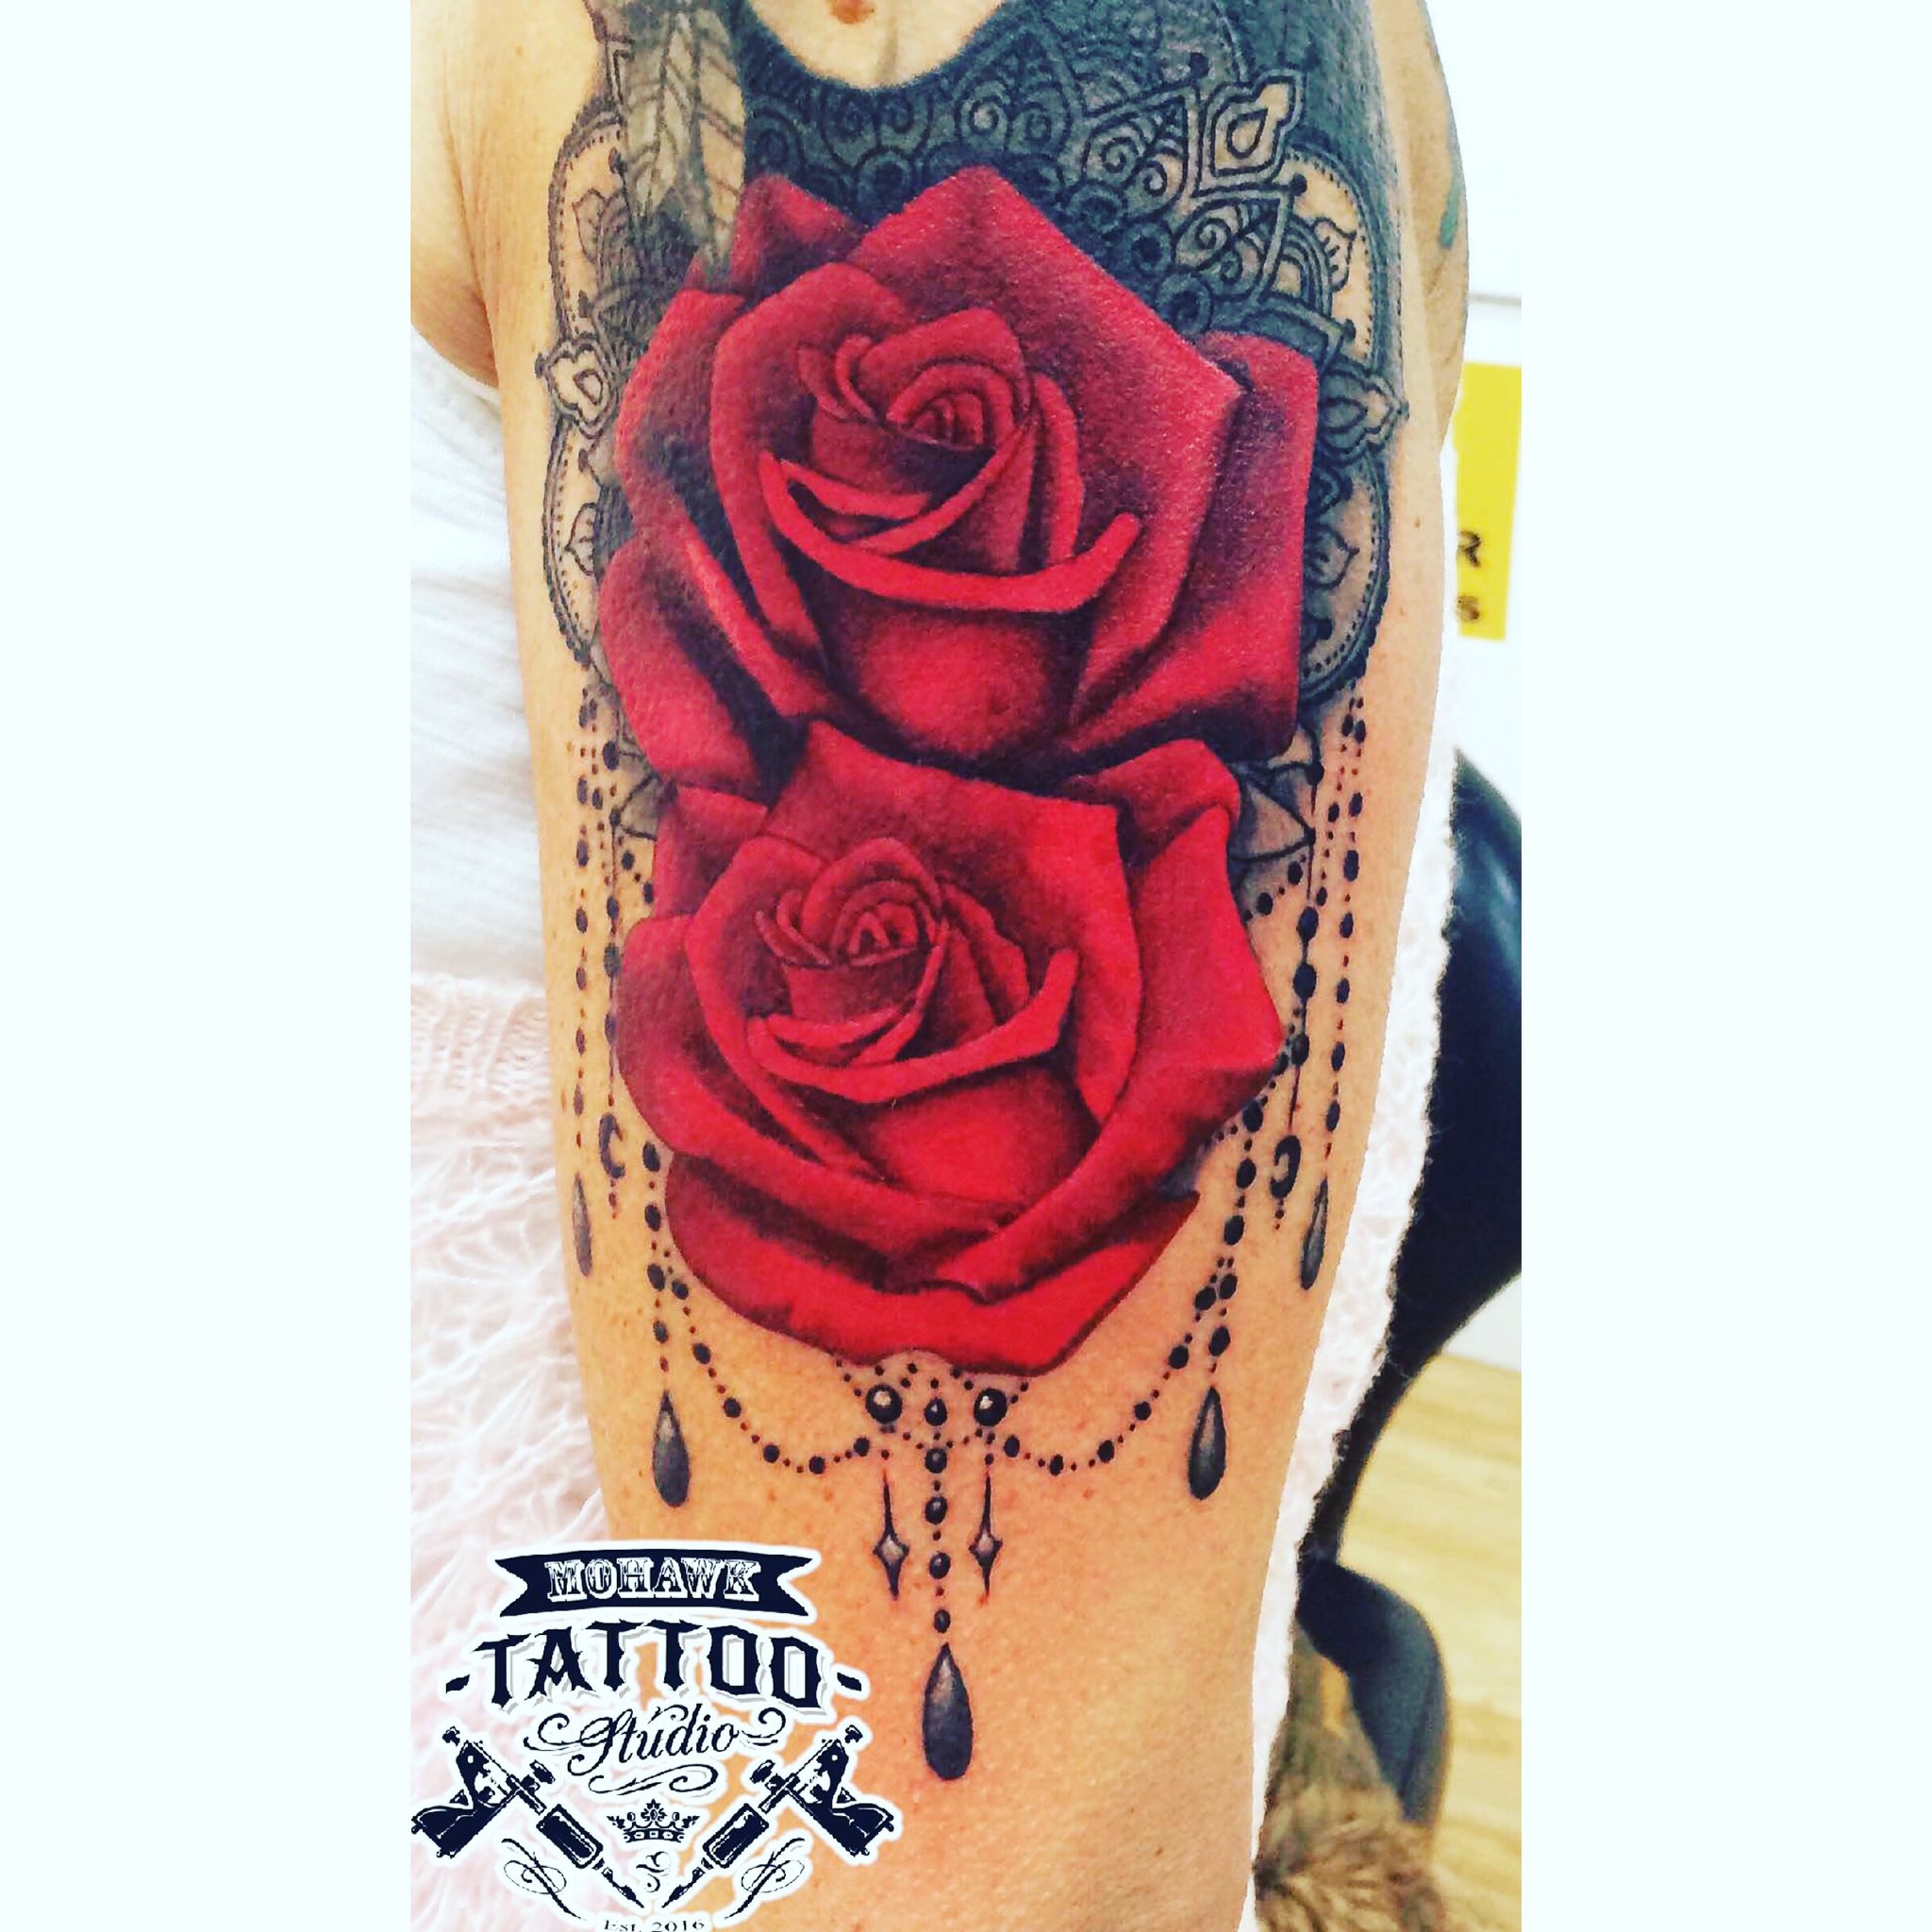 Tattoo uploaded by Adventure tattoo studios 2  Beautiful red rose and  butterfly by Sean at wwwadventuretattooscom inkedadventure  wwwadventuretattooscom femaletattoo butterflytattoo roseandbutterfly  thightattoo bluebutterfly rose redrose 